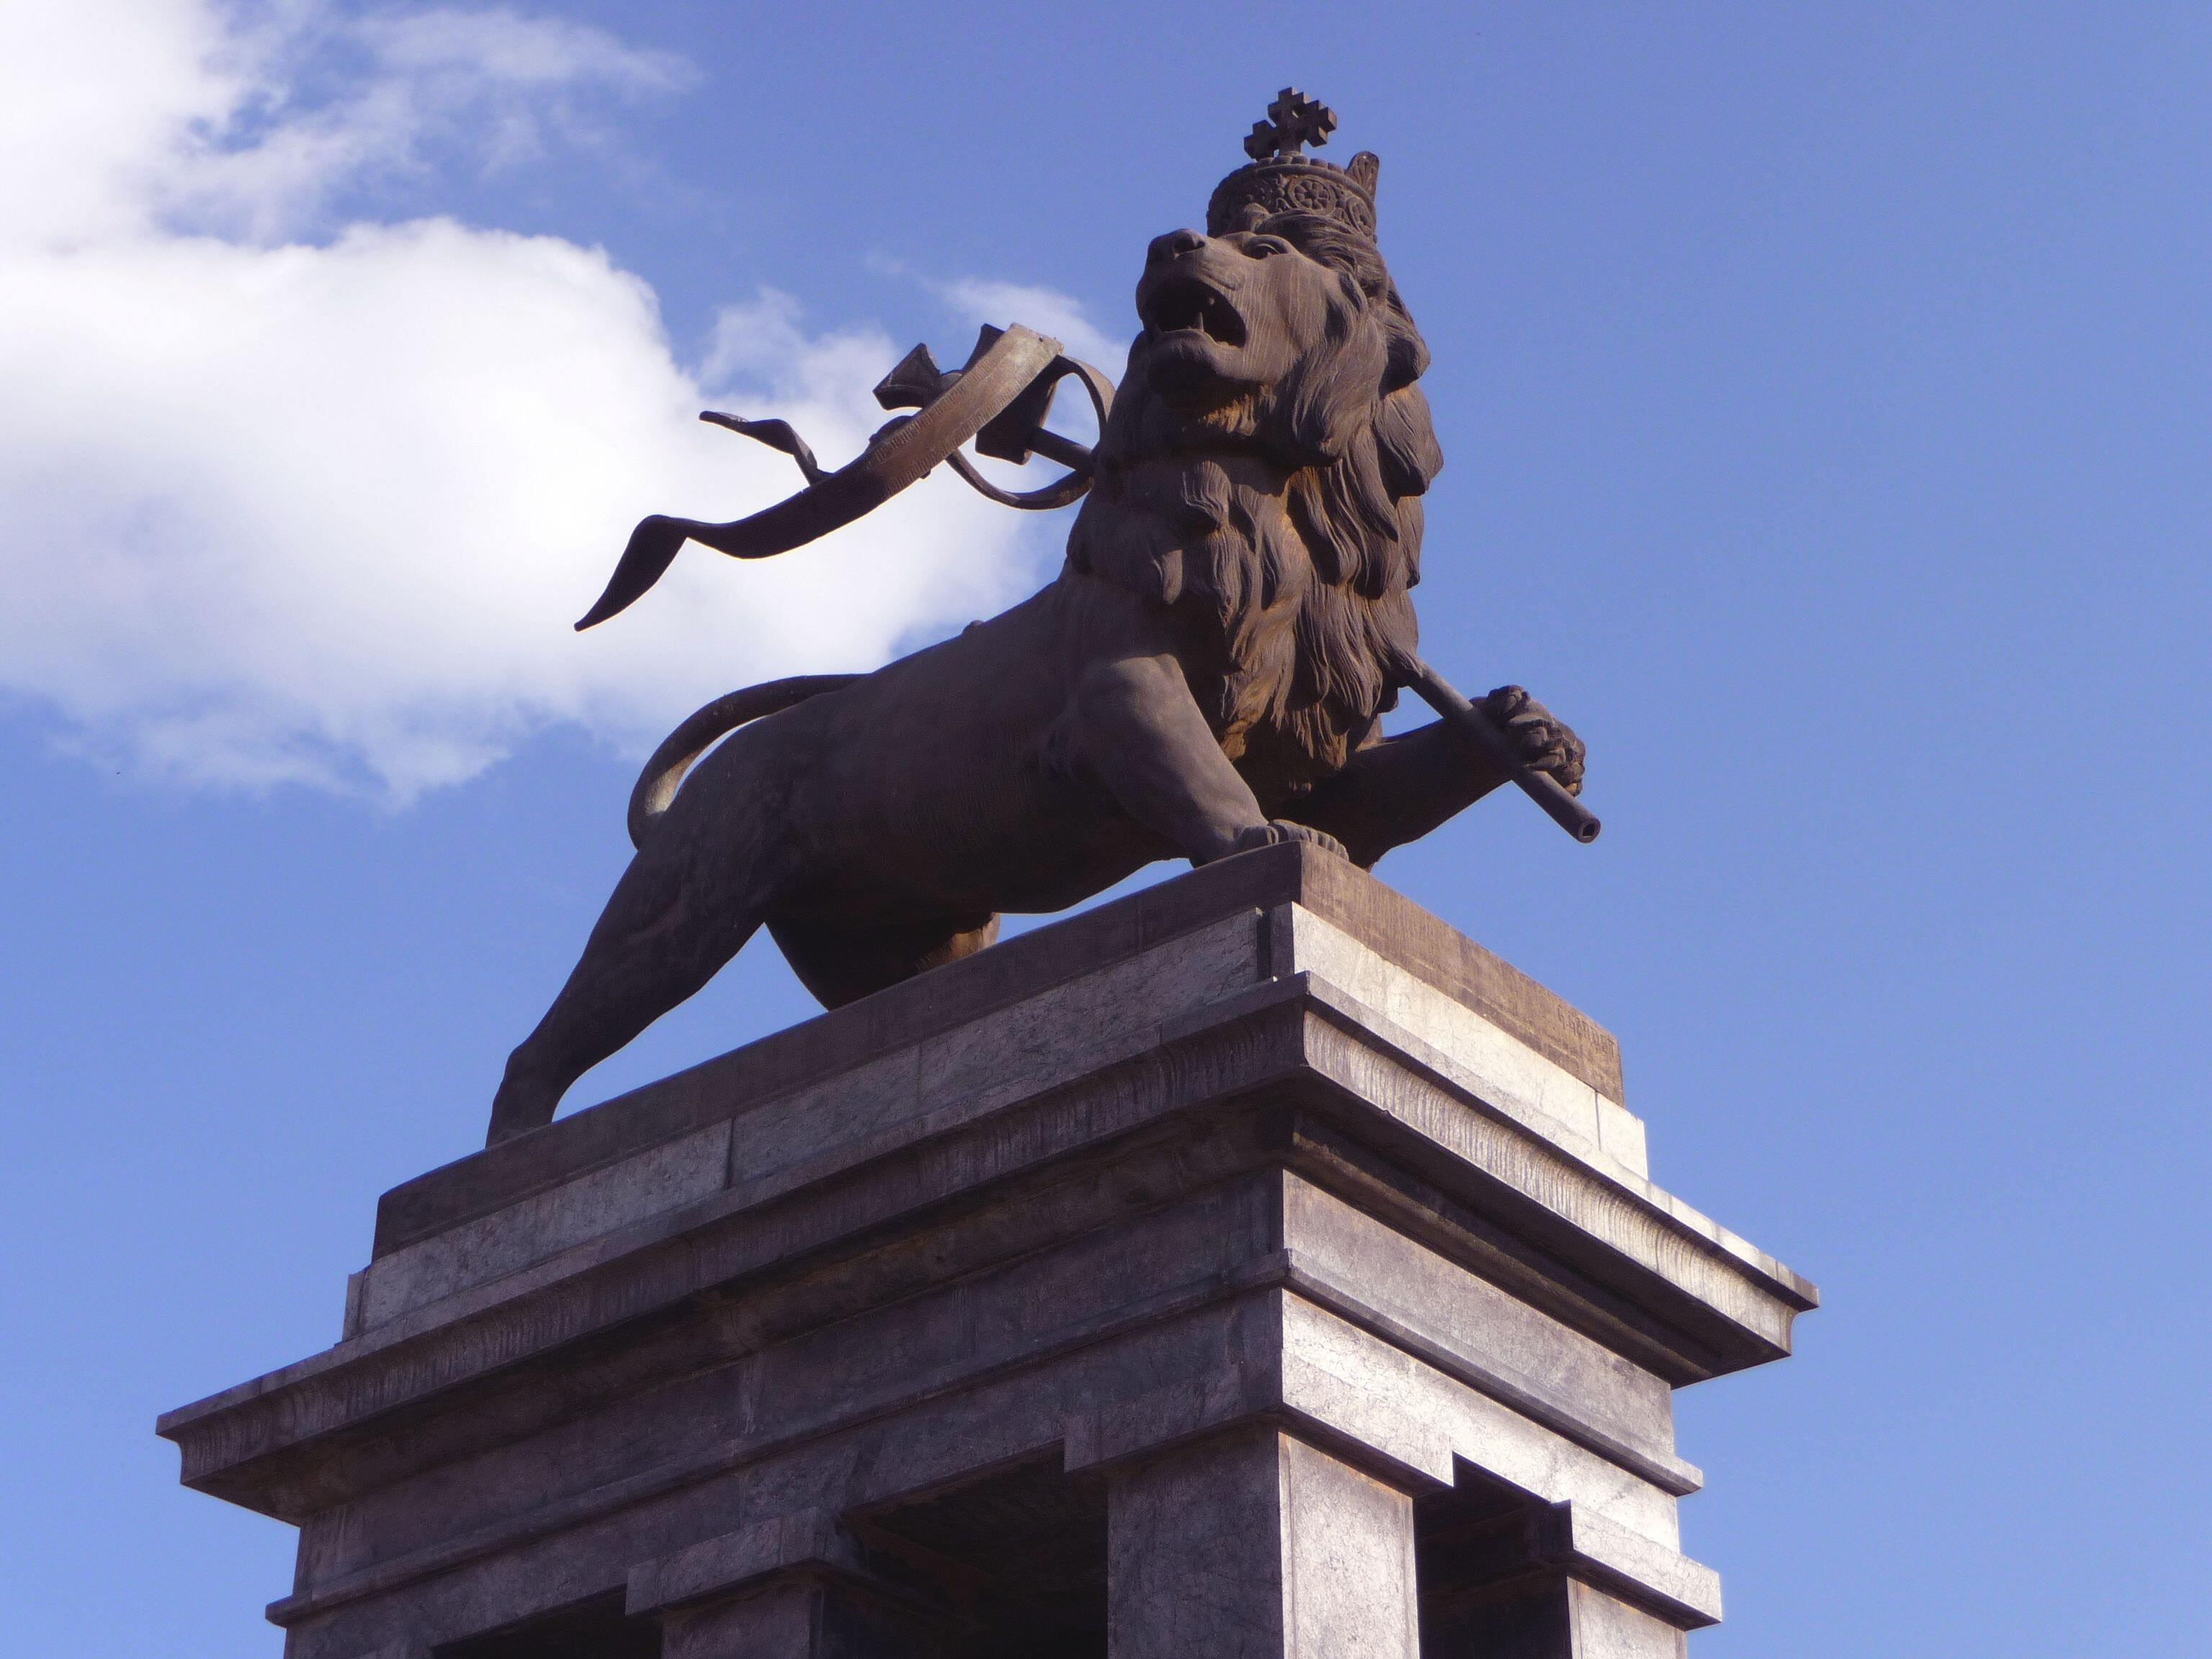 The Lion of Judah Monument in Addis Ababa (Ethiopia).